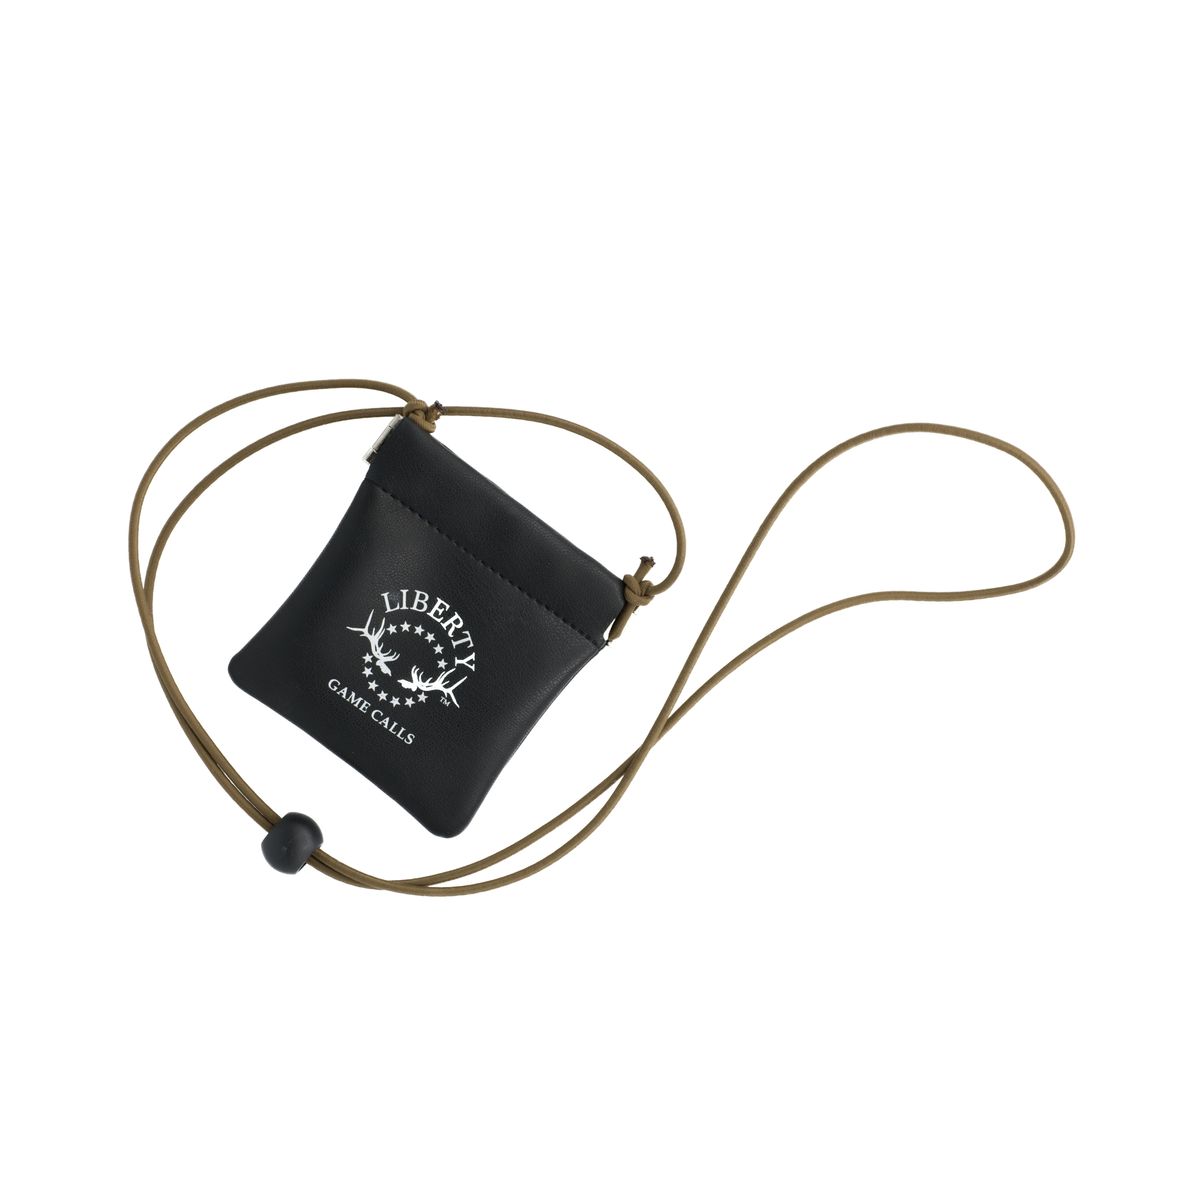 Liberty's Diaphragm Reed Pouch